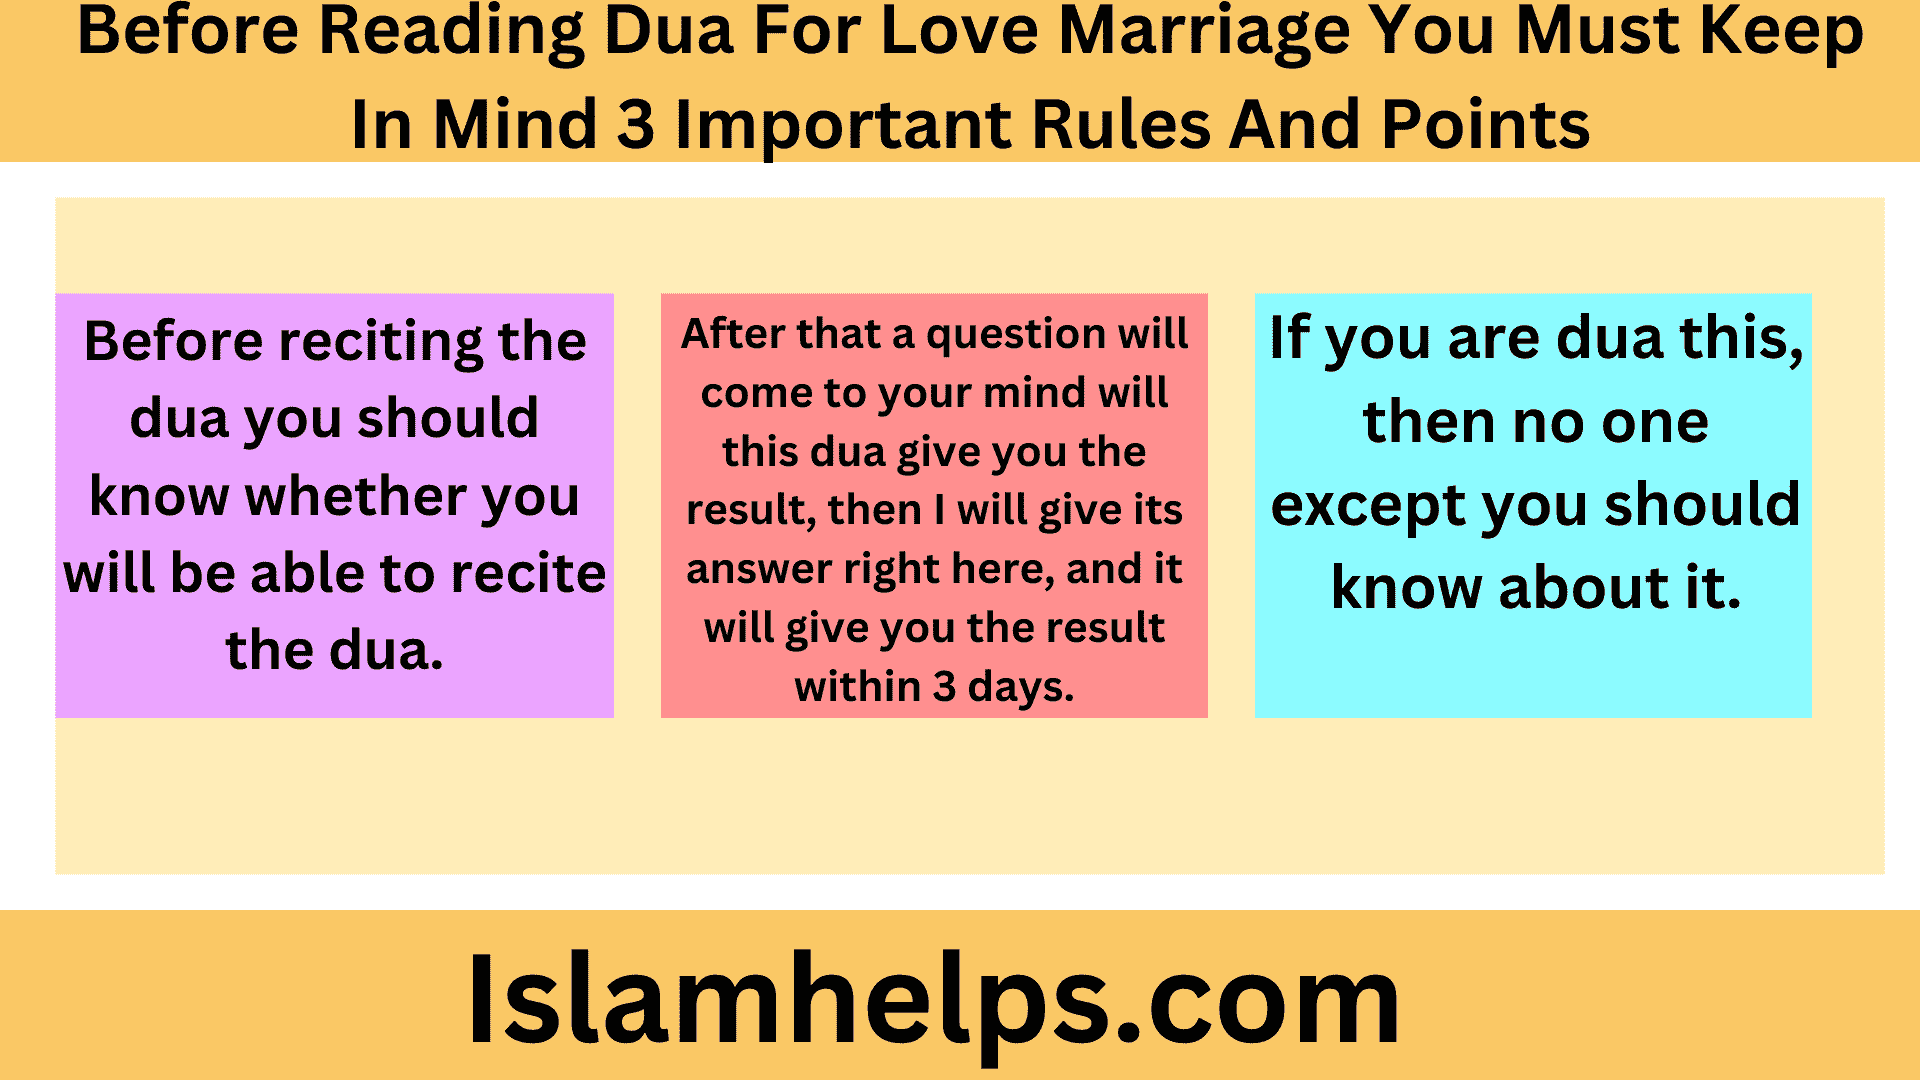 Before Reading Dua For Love Marriage You Must Keep In Mind 3 Important Rules And Points